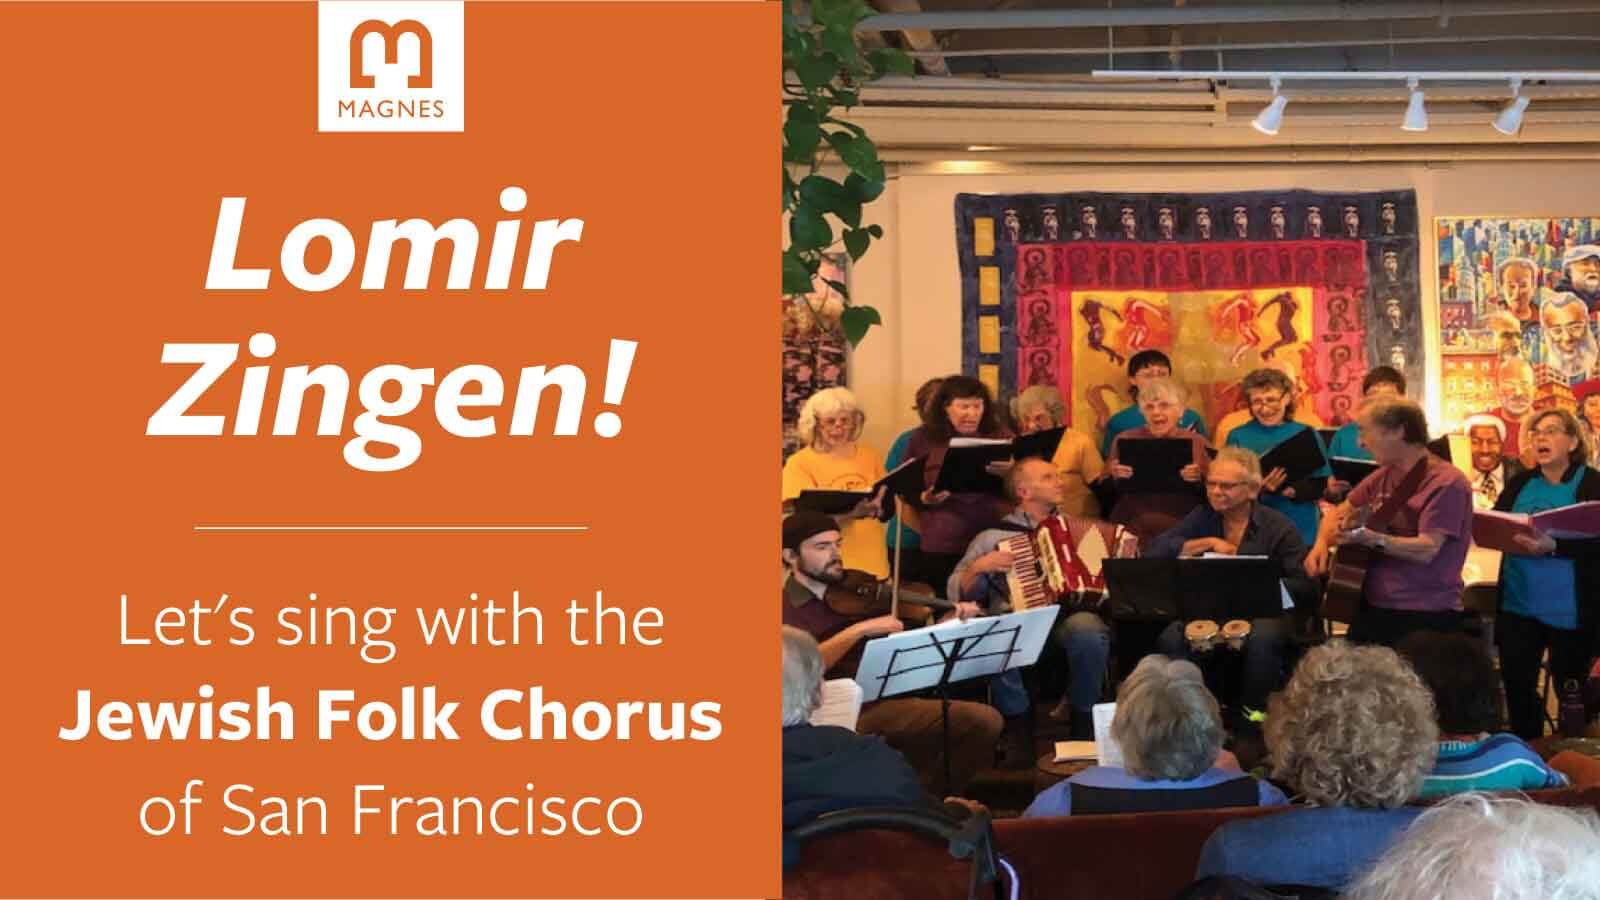 Orange panel on left with Magnes logo and text Lomir Zingen! Let's sing with the Jewish Folk Chorus of San Francisco. On right color photo of chorus singing in front of an audience.